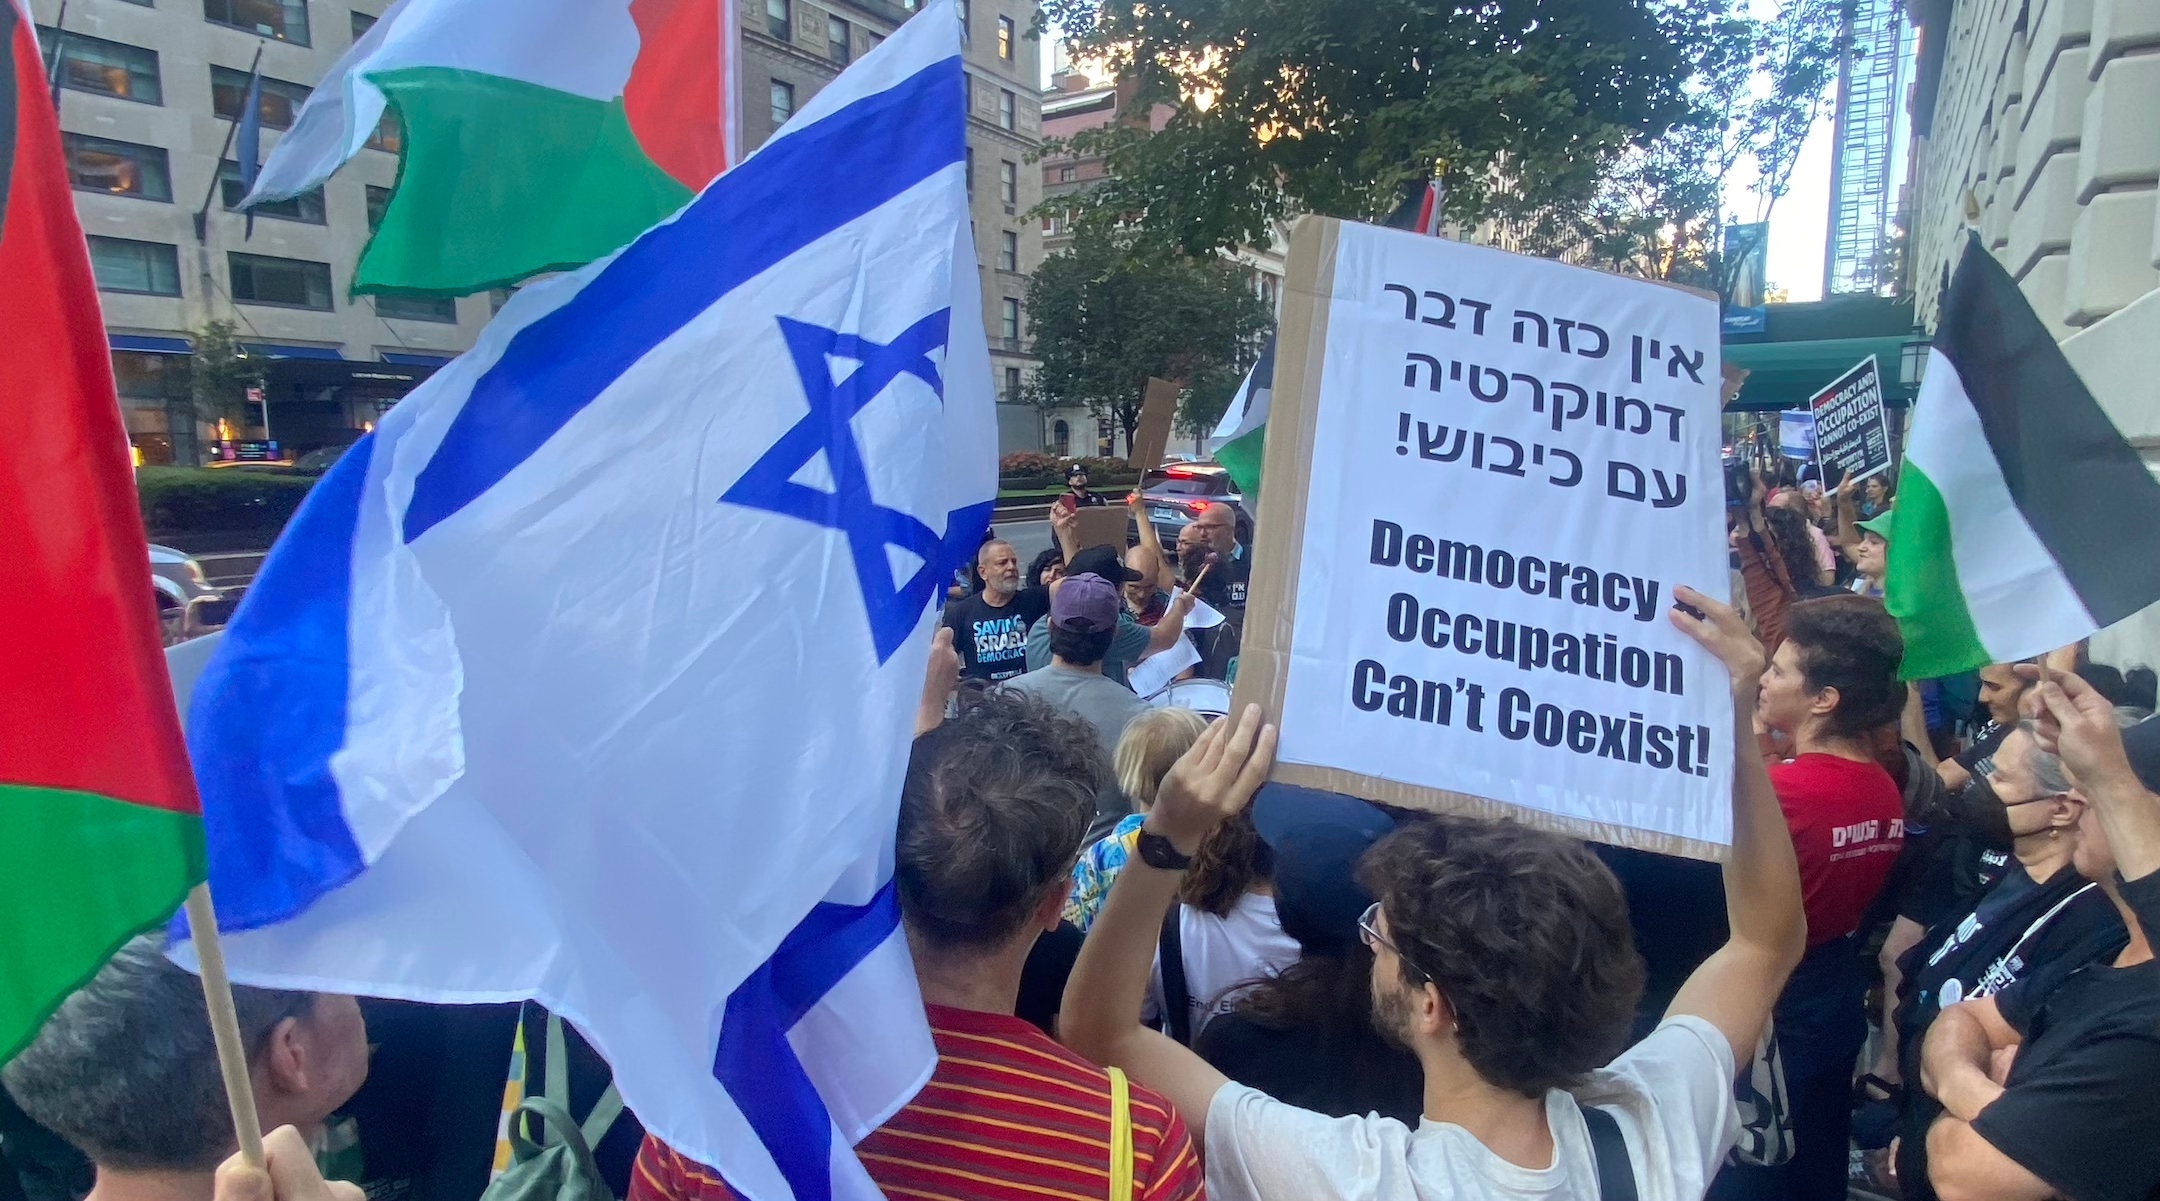 Anti-occupation activists protest outside of the Loews Regency Hotel in East Midtown on September 19, 2023. (Tori Luecking)